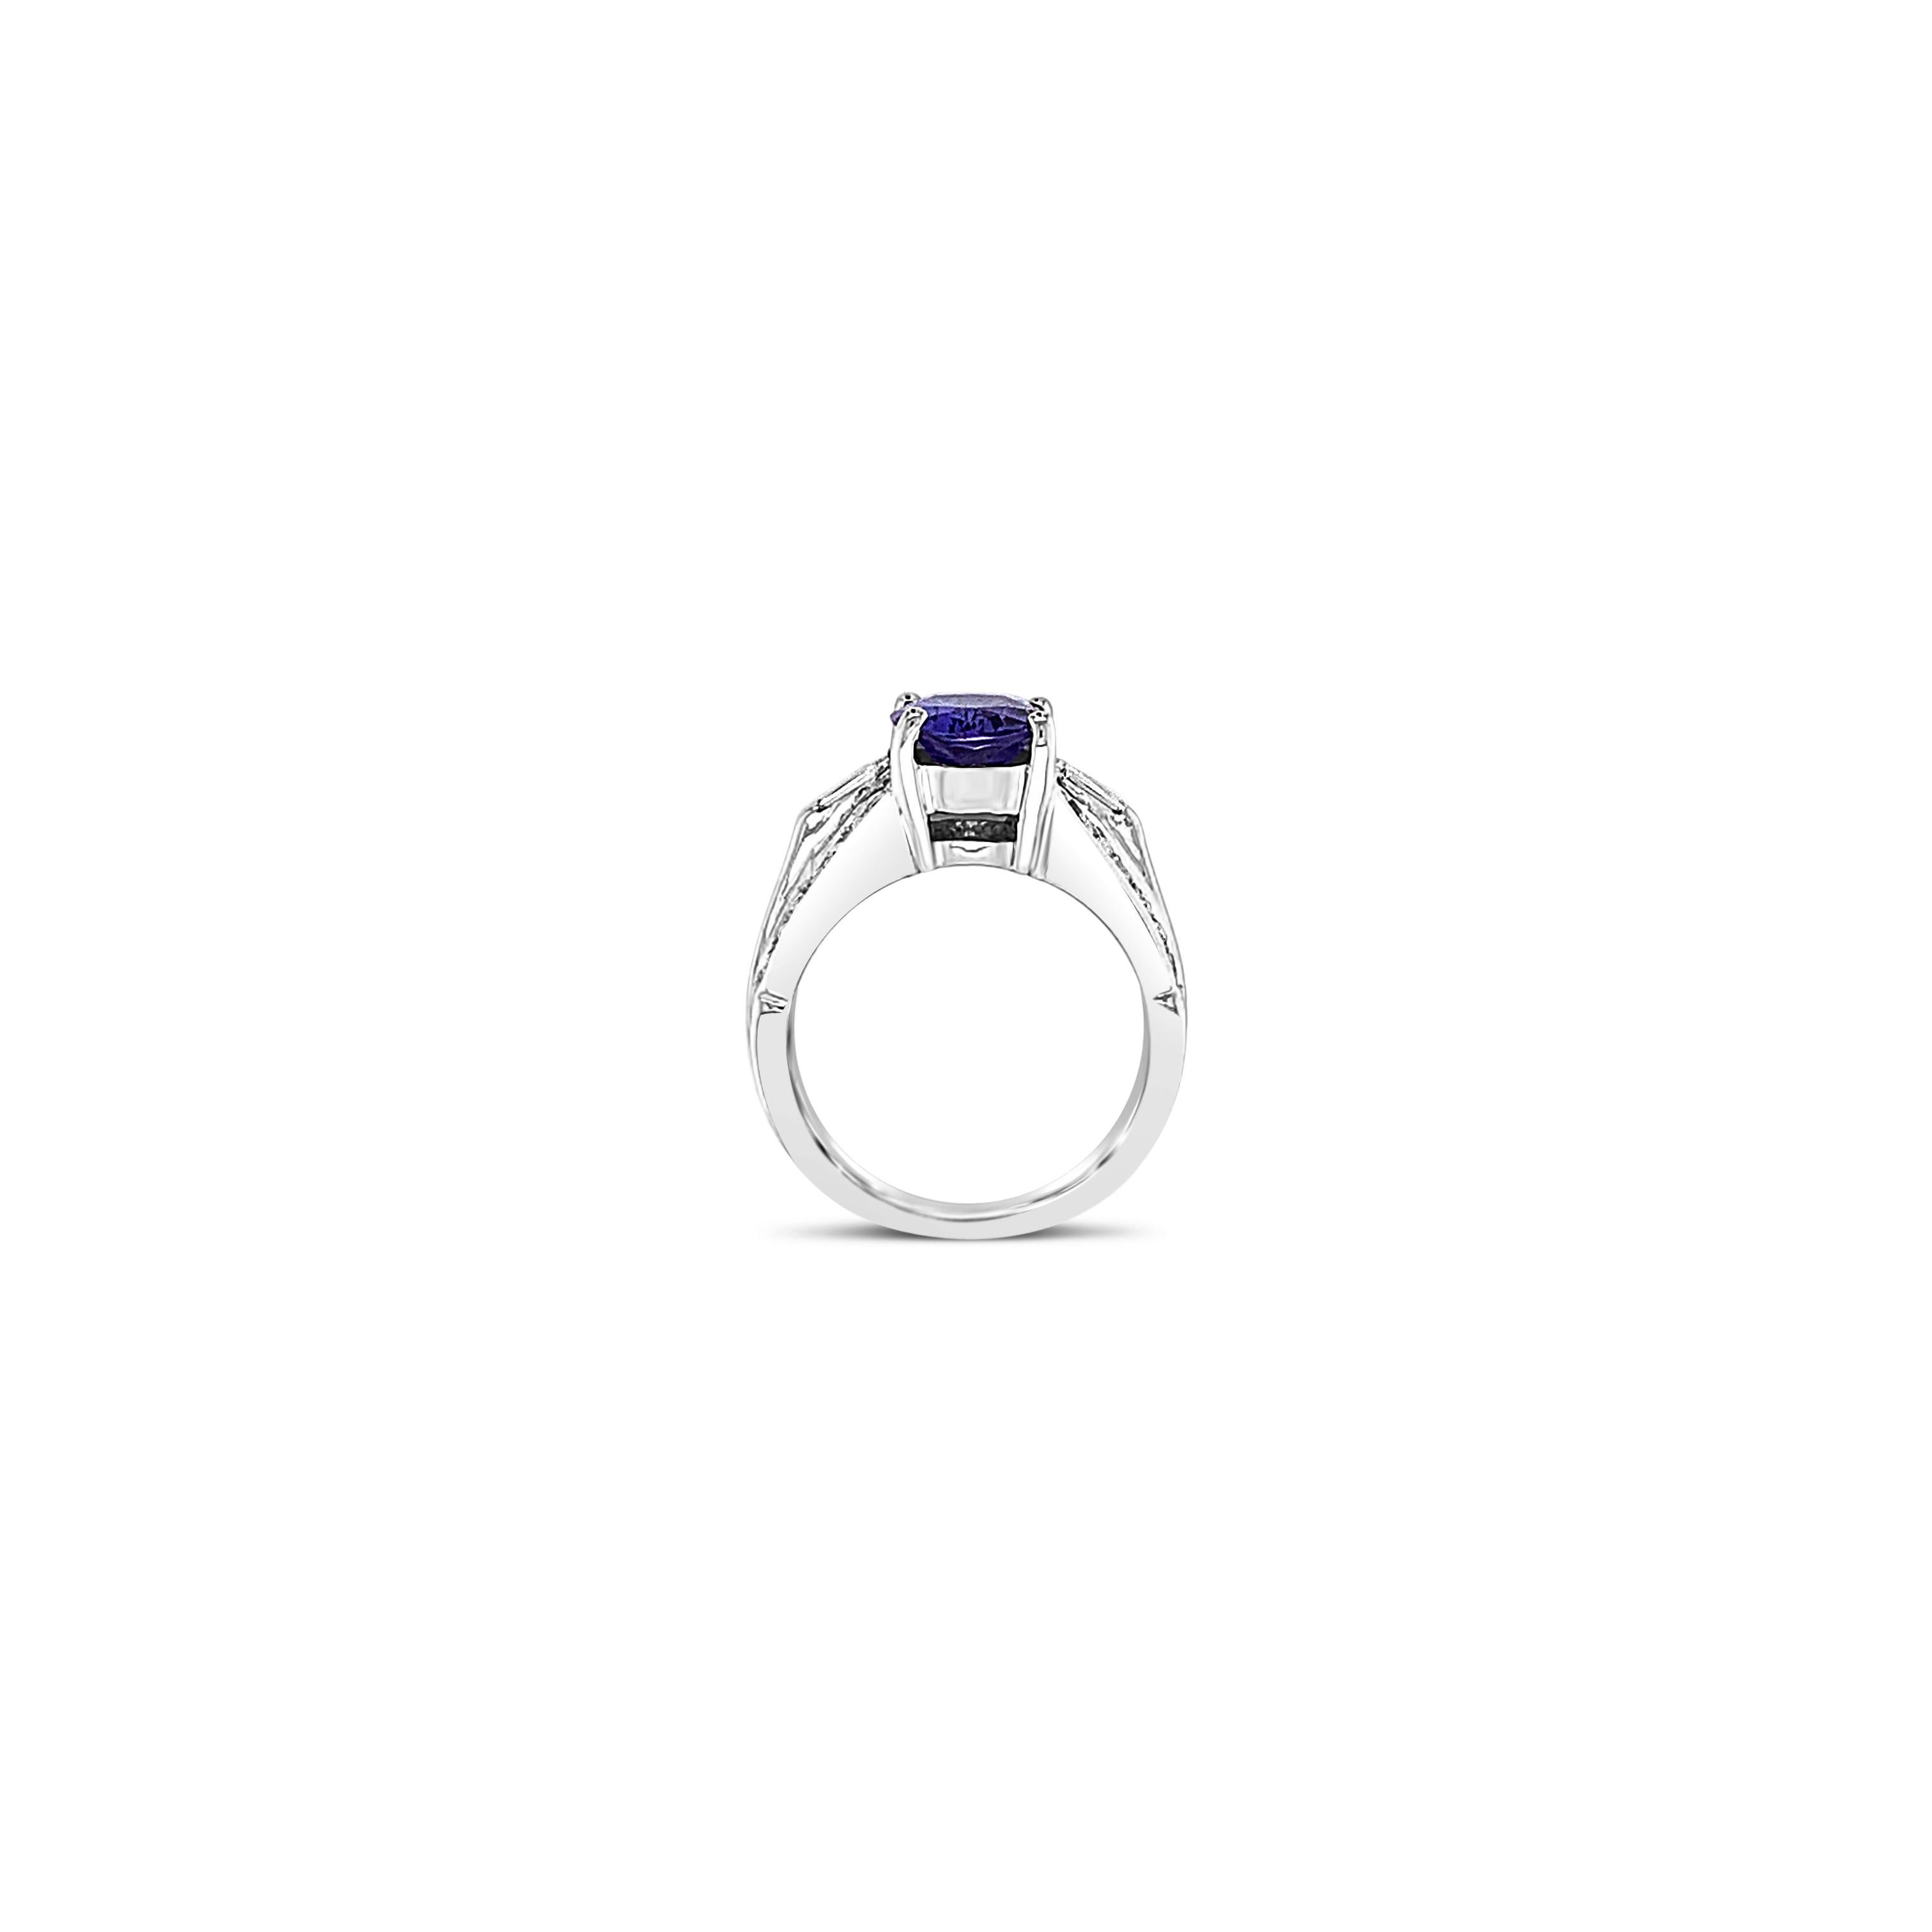 Upwards of 2 Carats of Tanzanite and White Diamonds, this LeVian Ring is set in 14K White Gold. Ring may or may not be sizable and is in great condition. Ring Size 5.5. Comes with Authentic LeVian Box and Pouch!